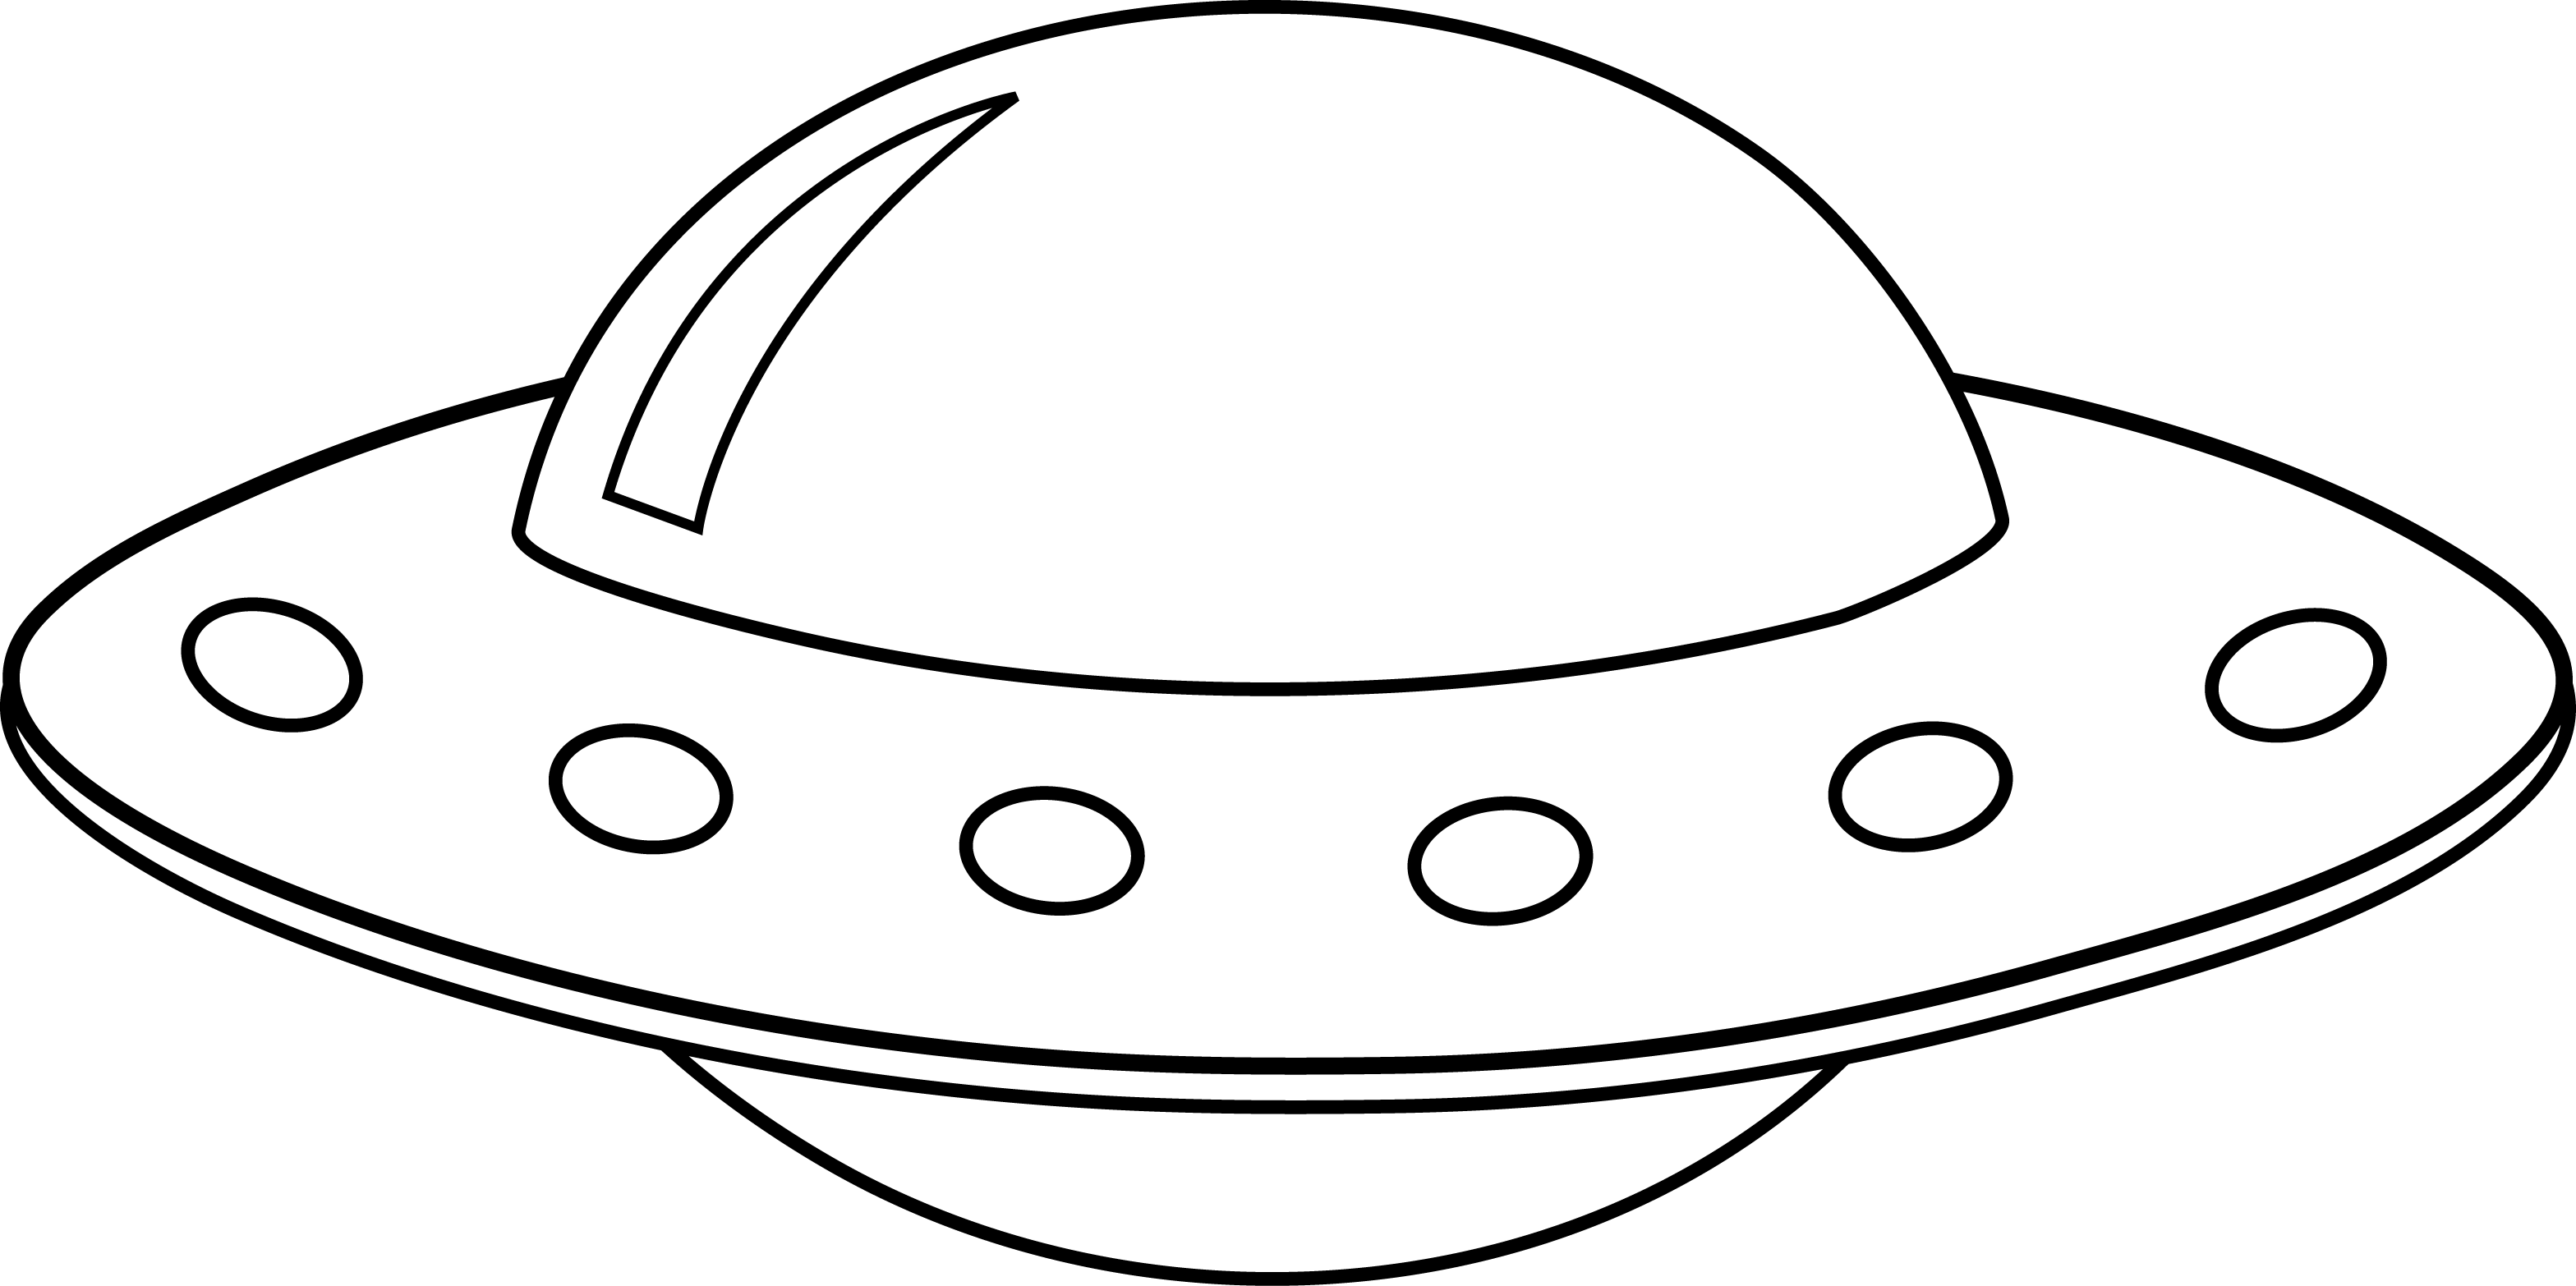 Alien Spaceship Clipart Black And White Images  Pictures - Becuo